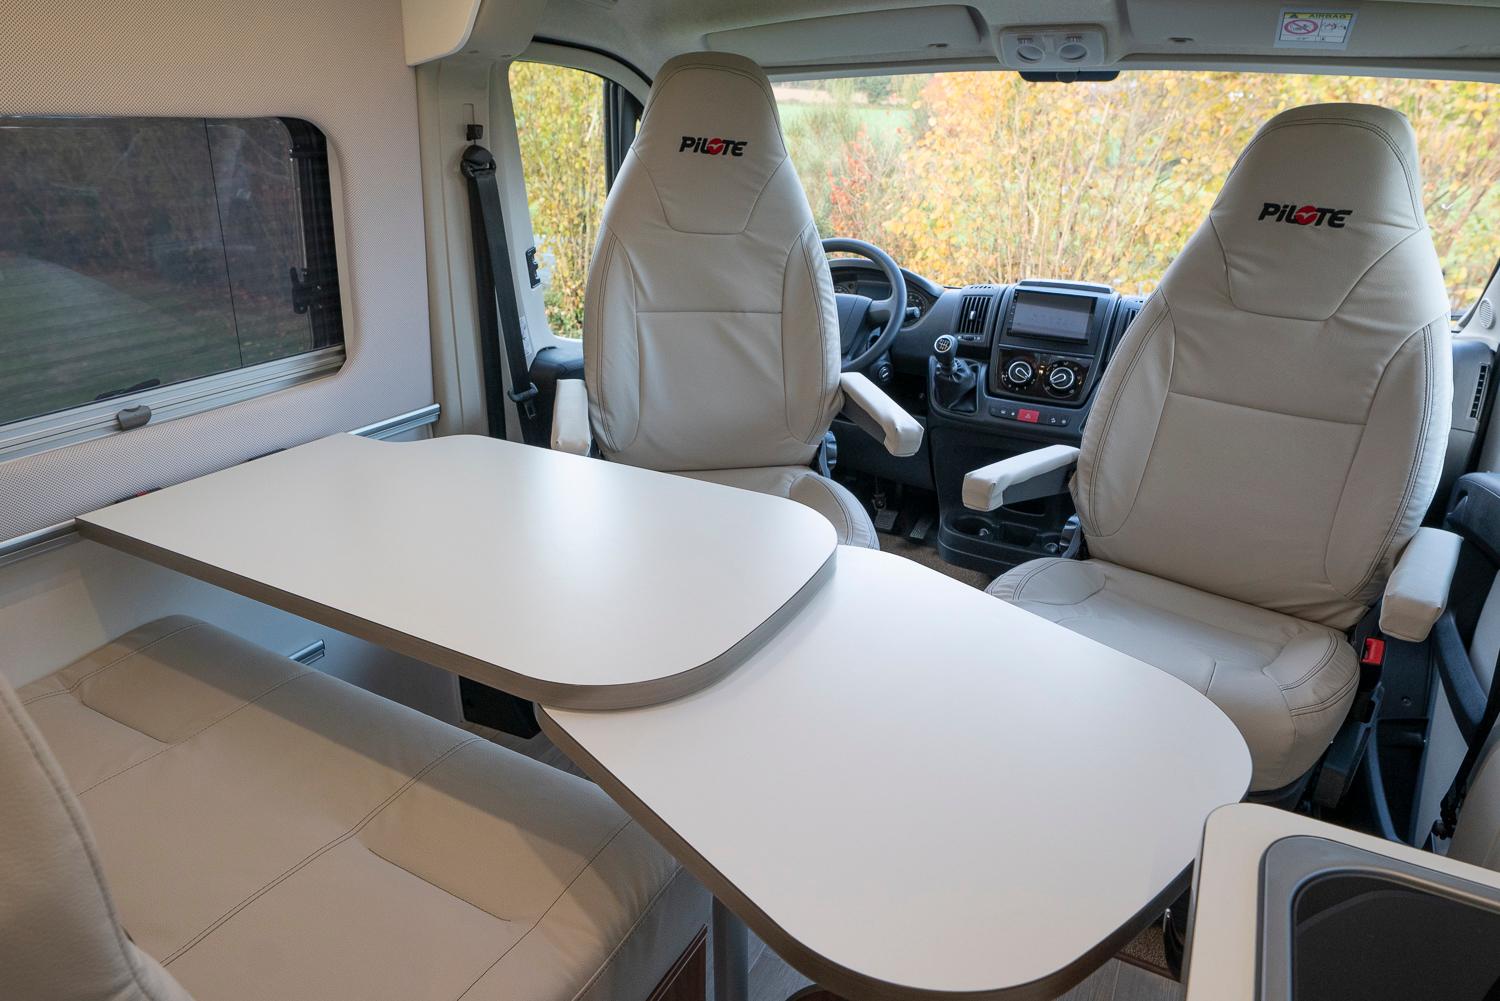 Pilote will satisfy your hunger for camper vans – image 3